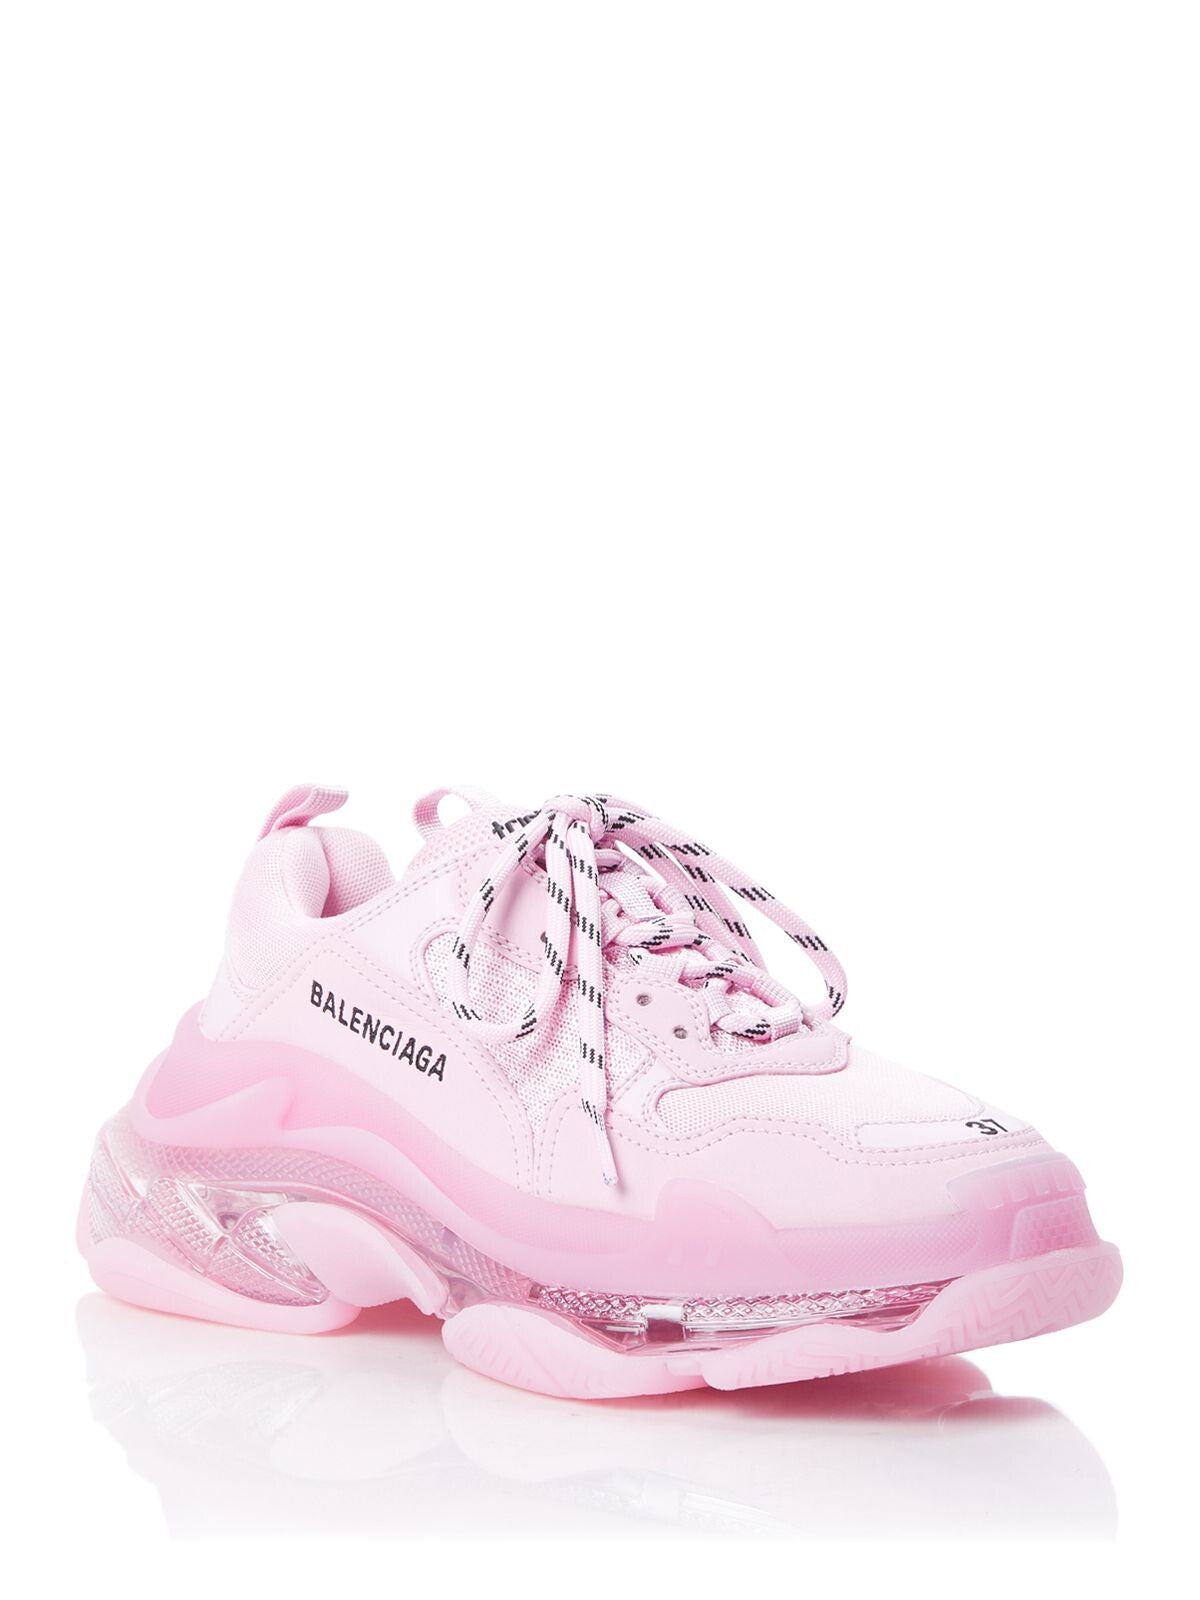 BALENCIAGA Womens Pink Logo Removable Insole Comfort Triple S Round Toe Lace-Up Athletic Sneakers Shoes 4